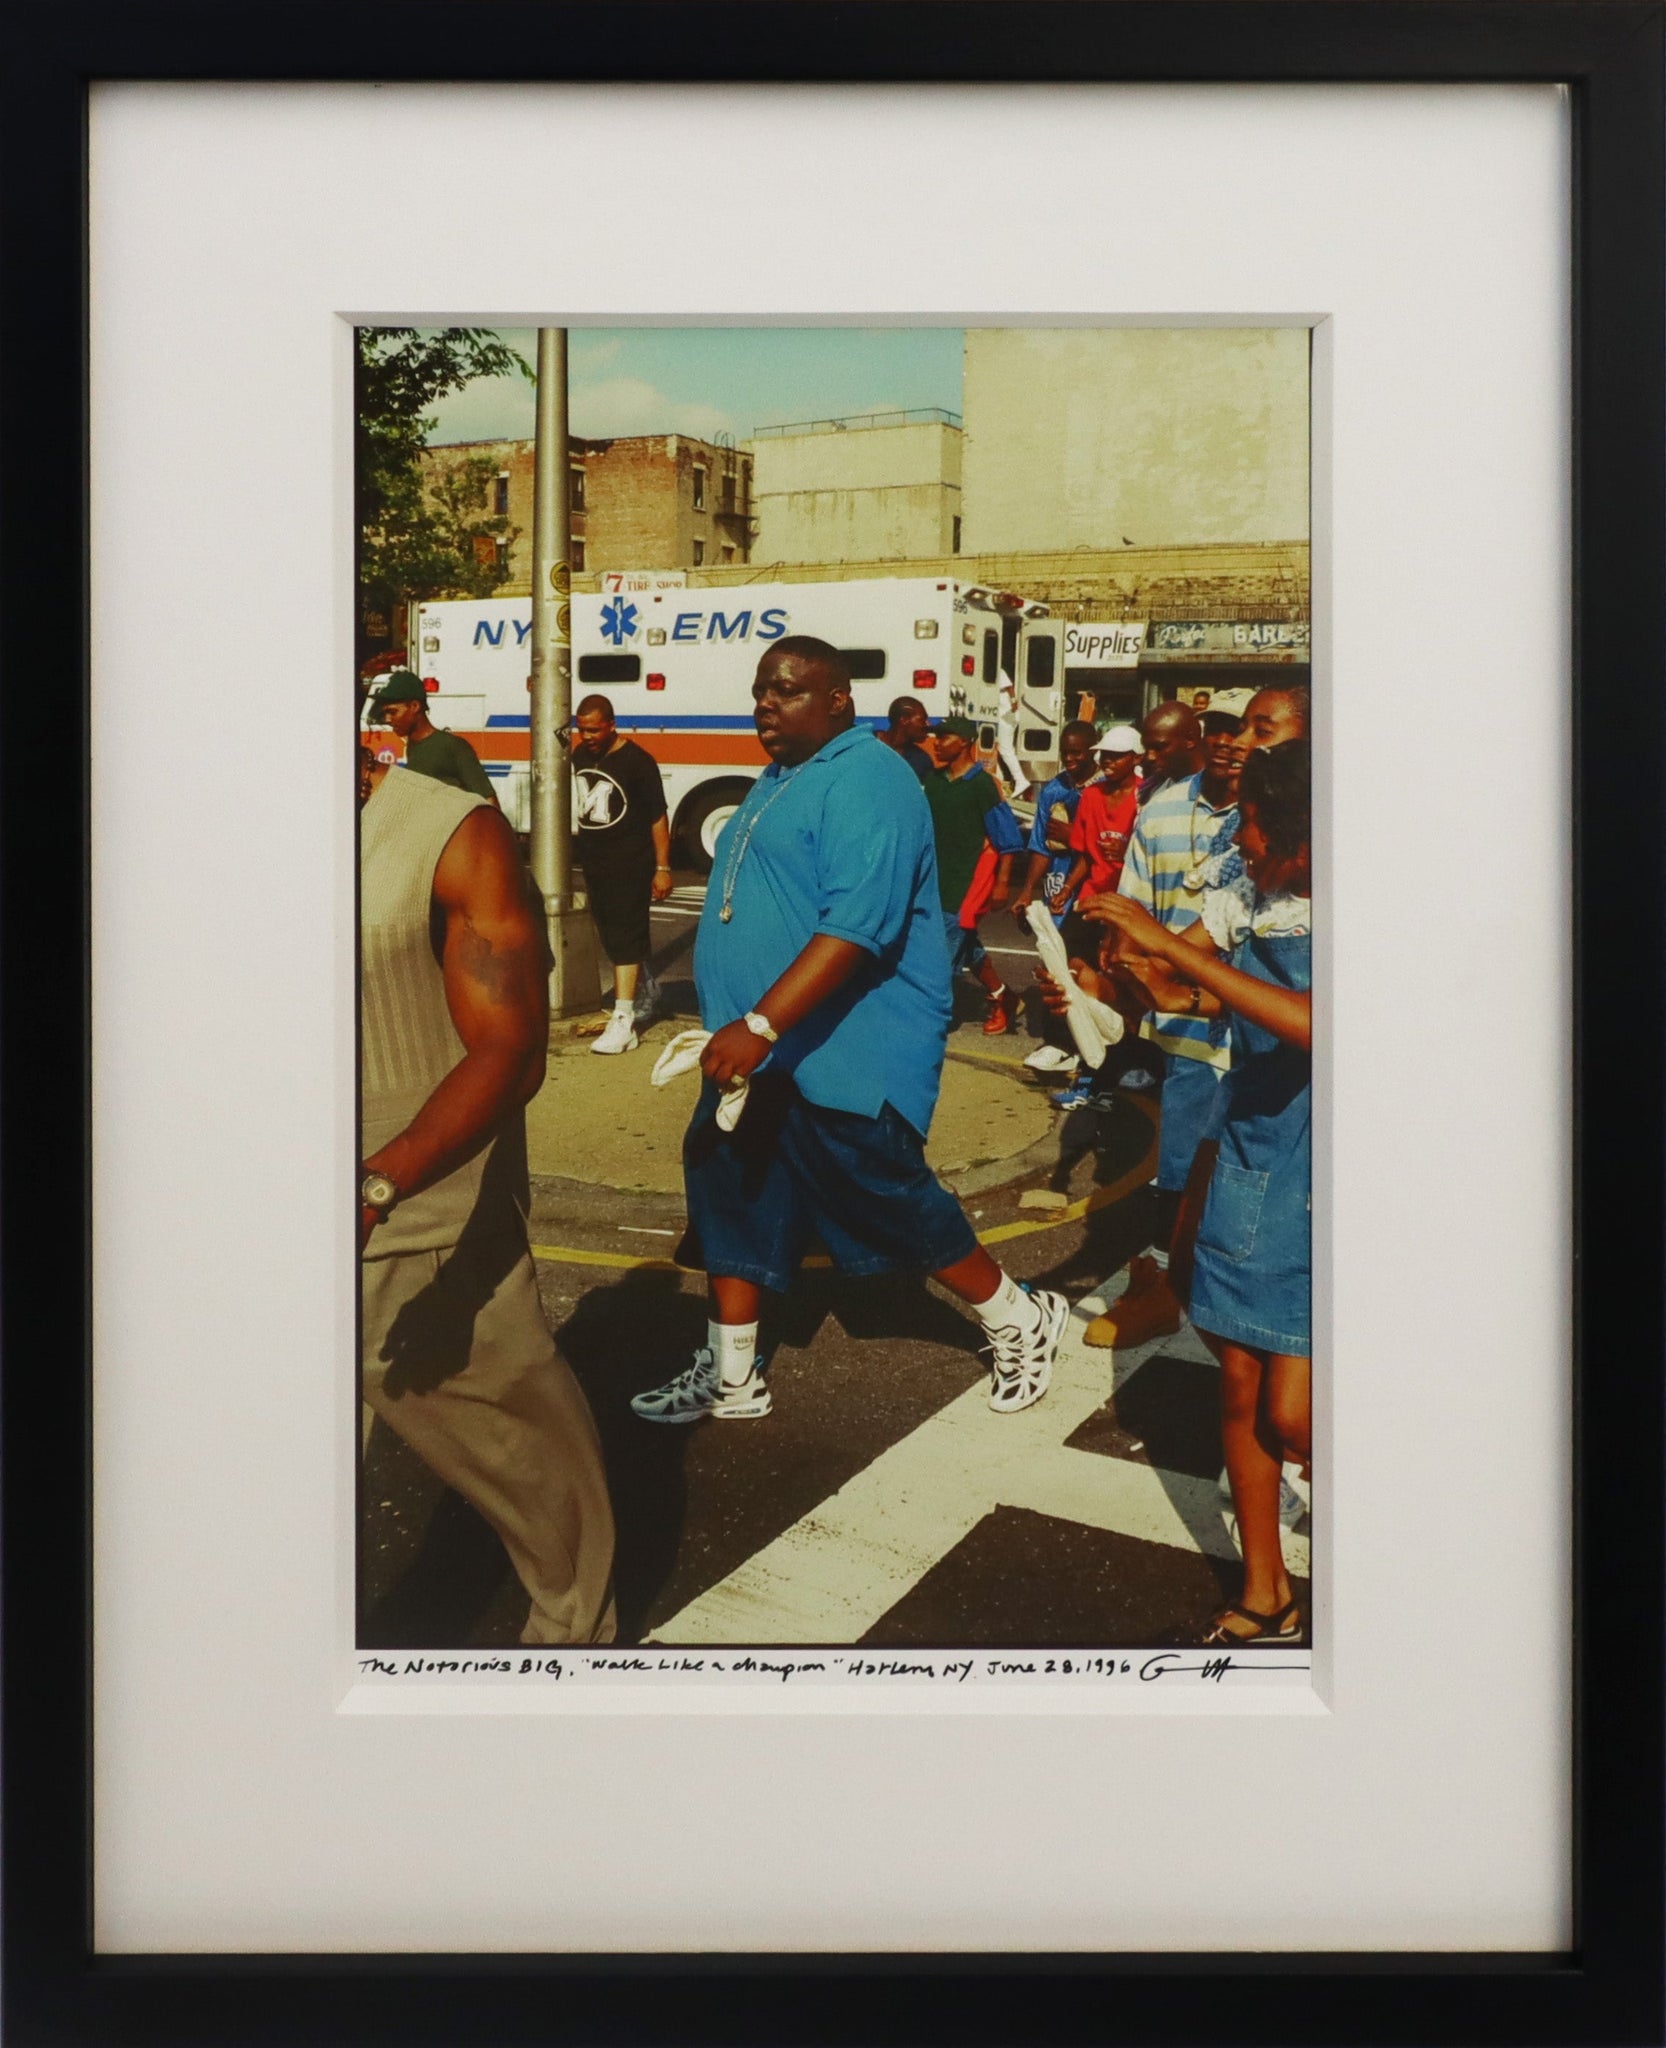 The Notorious B.I.G. 'Walk Like A Champion' - Framed